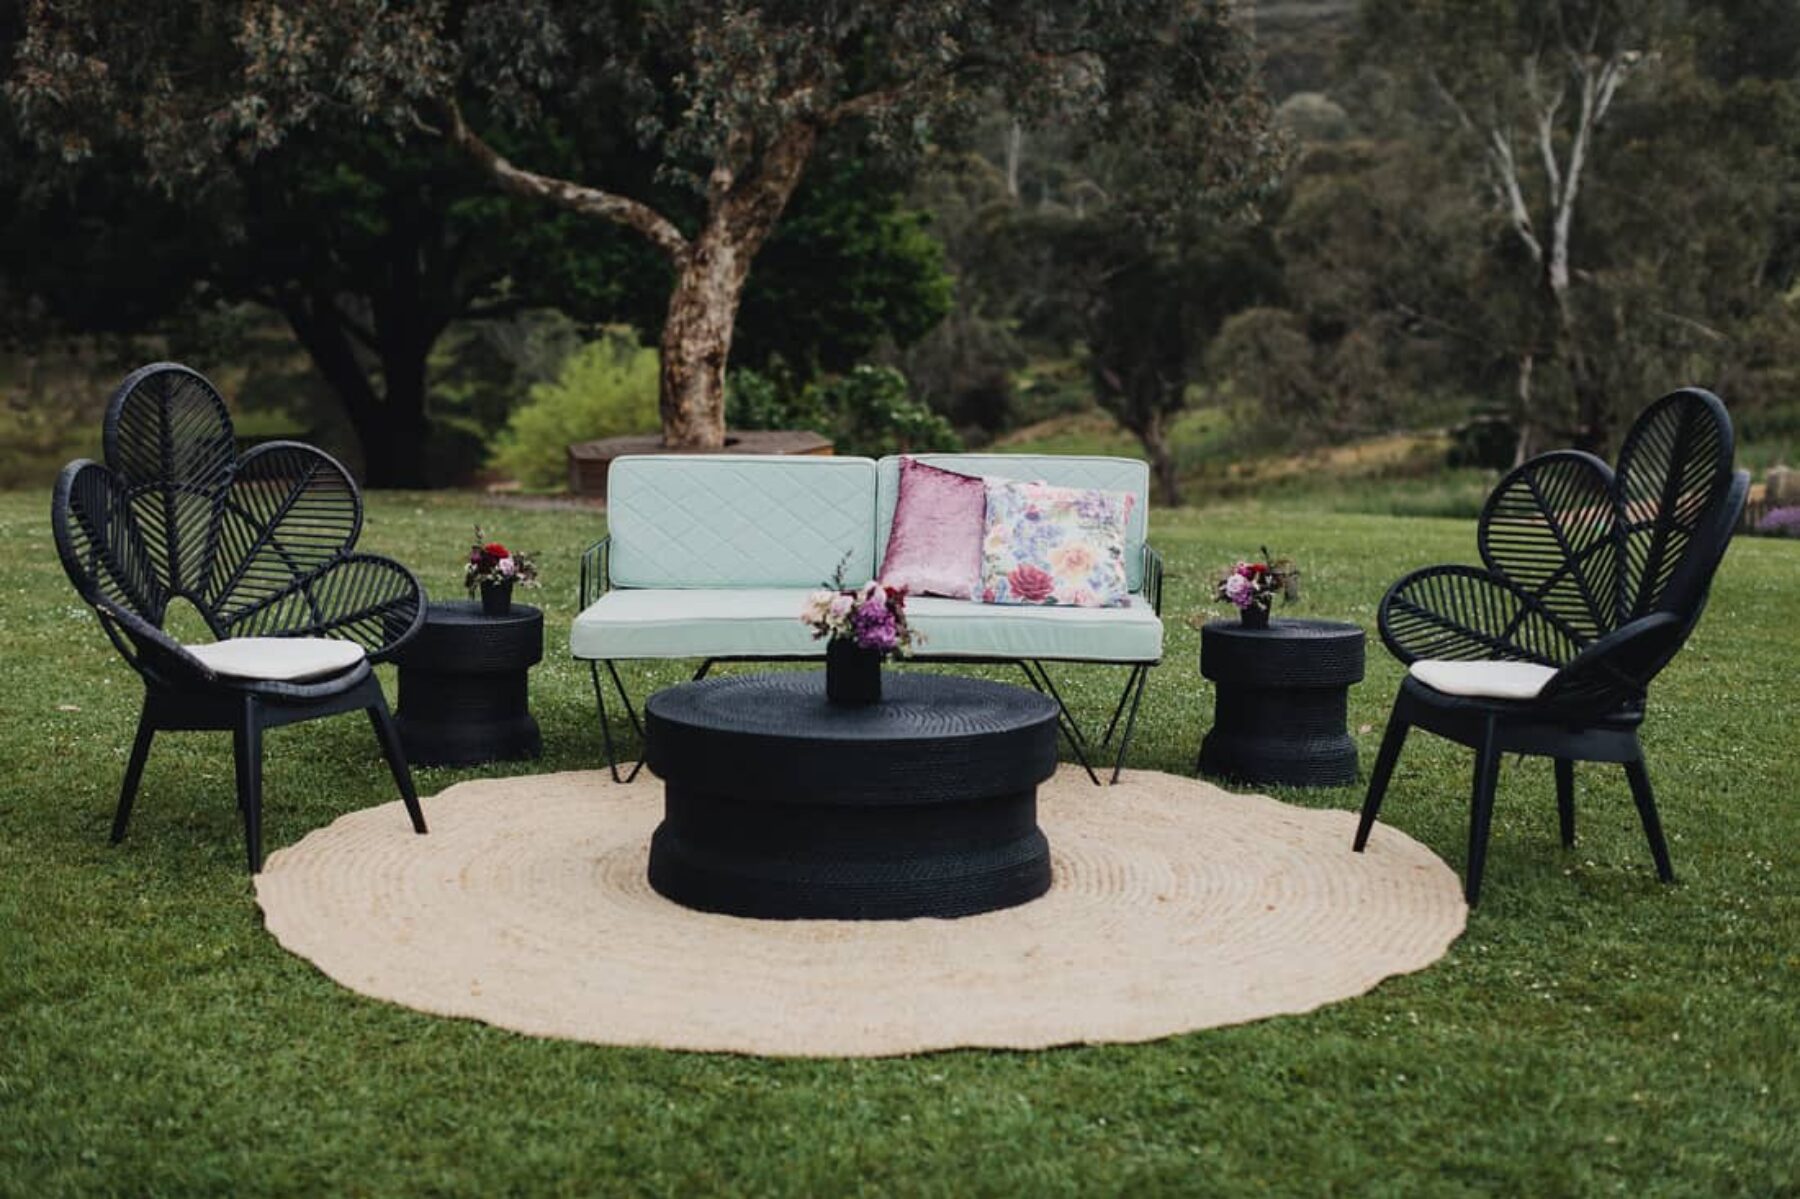 lawn lounge setup with black peacock chairs